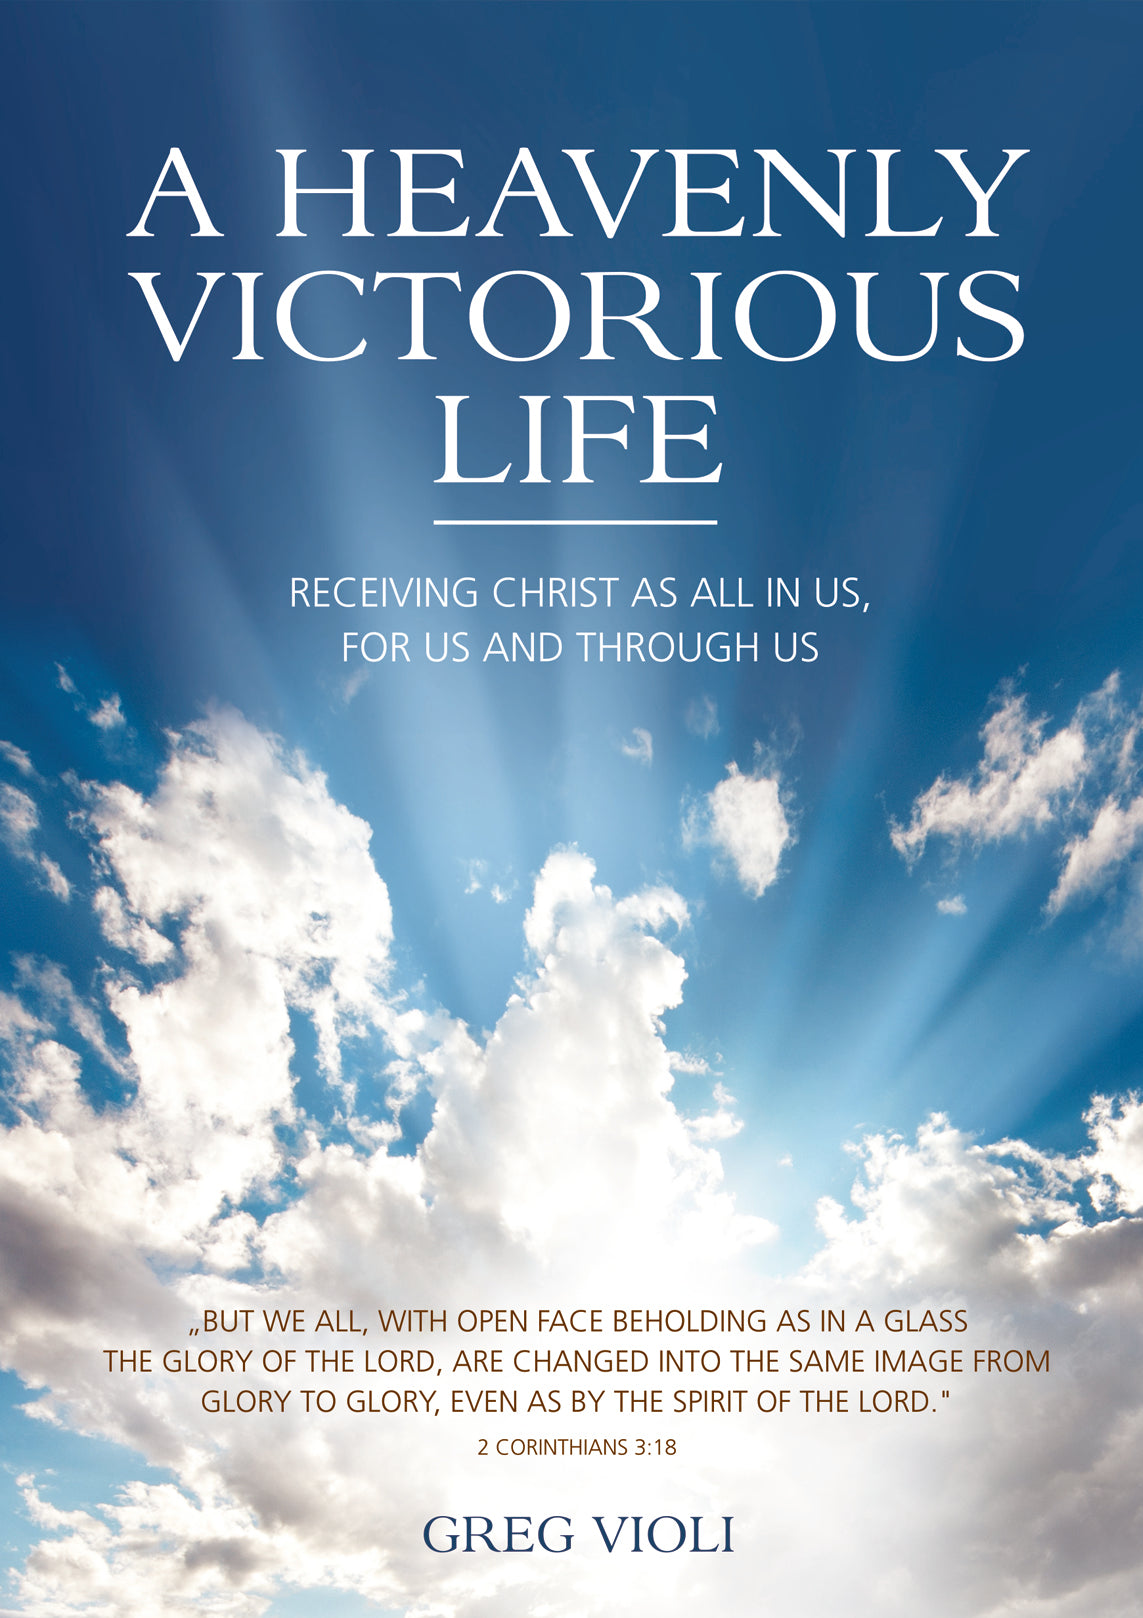 A Heavenly Victorious Life